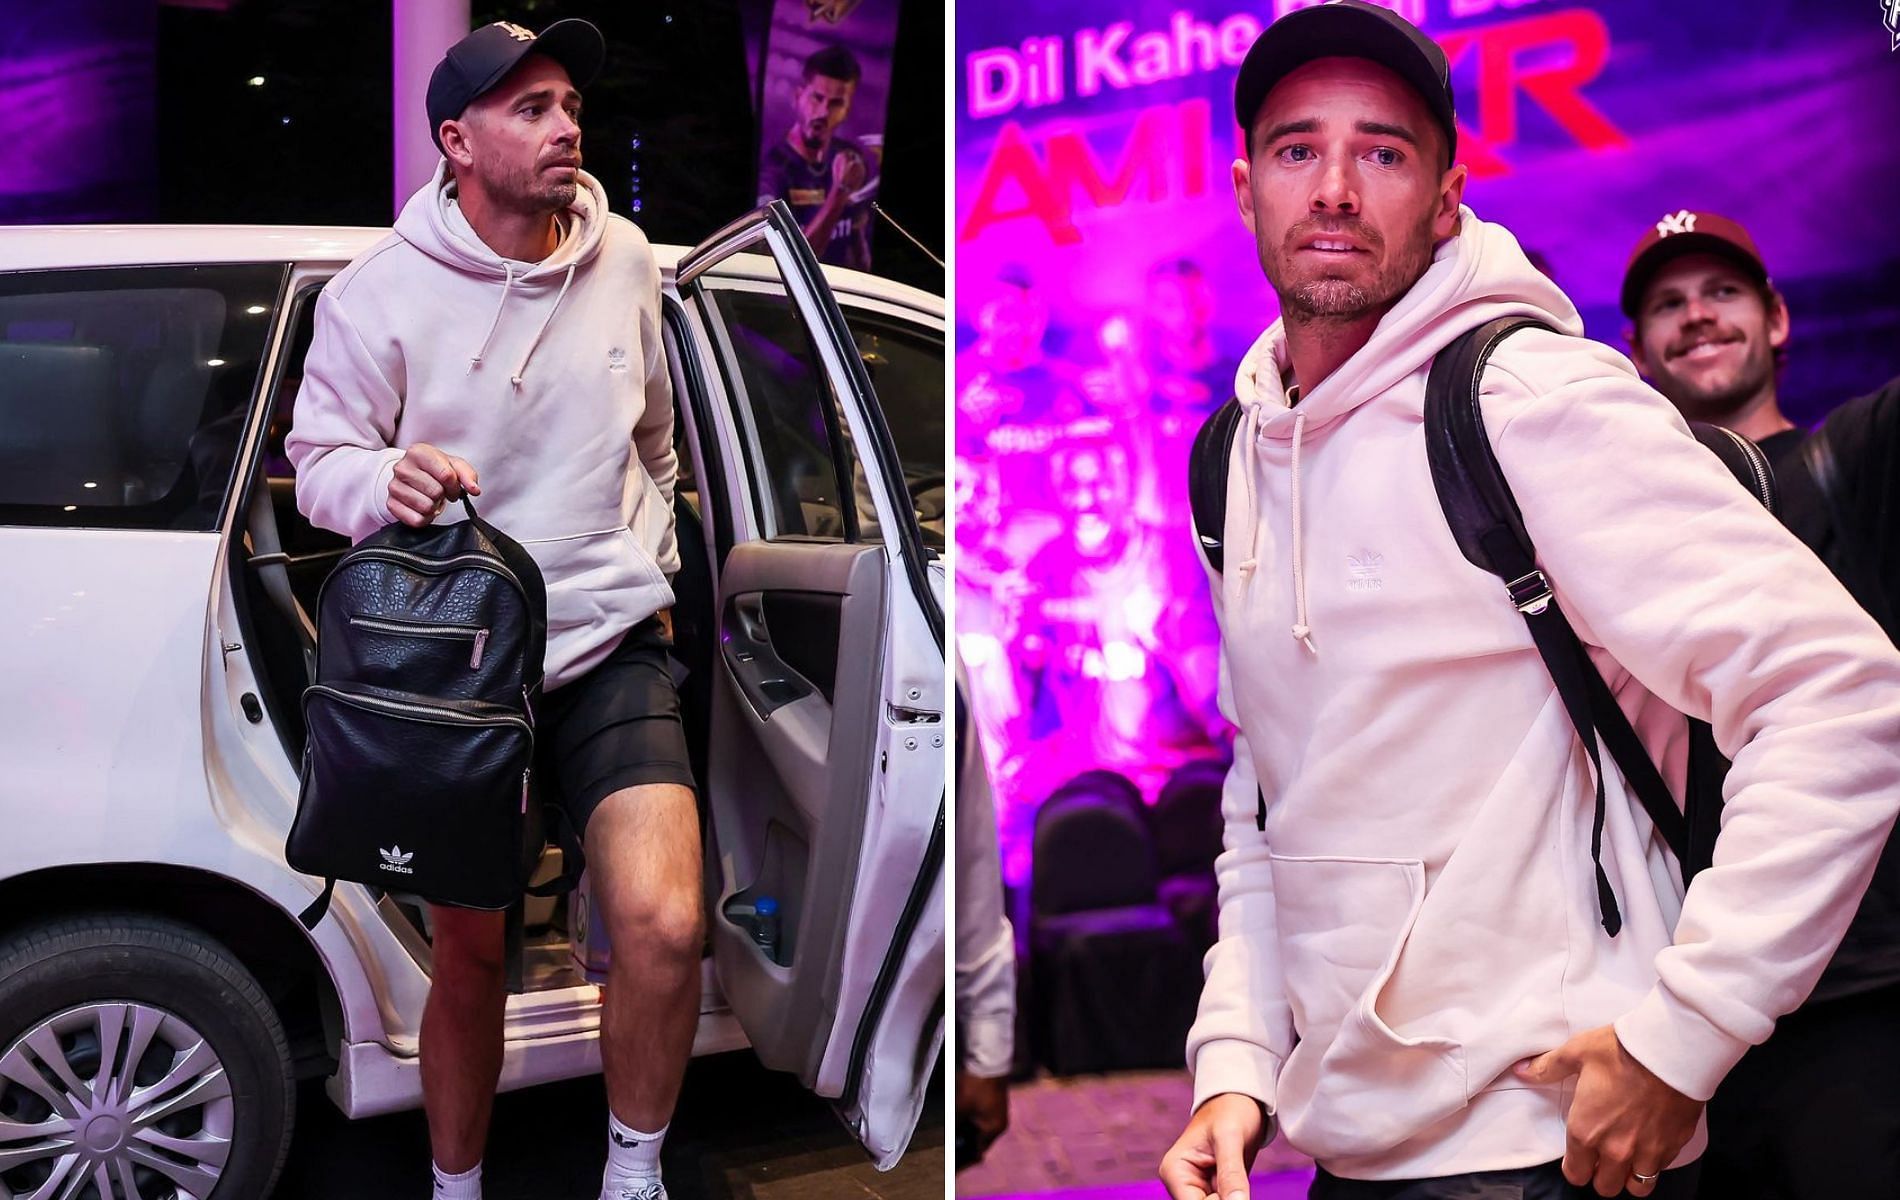 Tim Southee arrived in Kolkata on Monday. (Pics: Instagram)